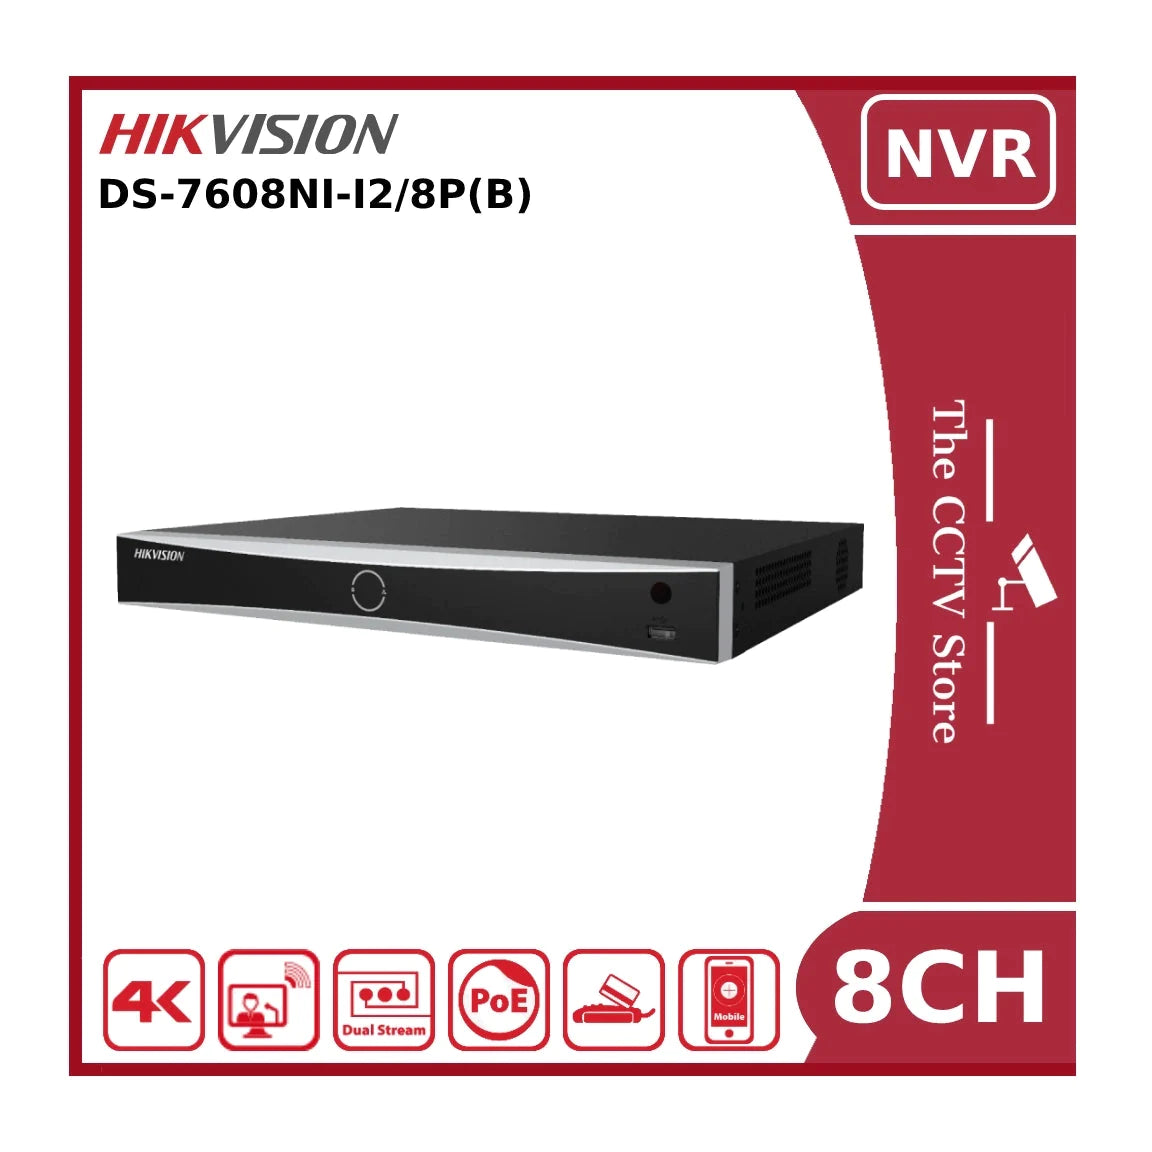 Hikvision DS-7608NI-I2/8P(B) 12MP PoE 8 Channel NVR With 2HDD Bays & 8PoE Ports